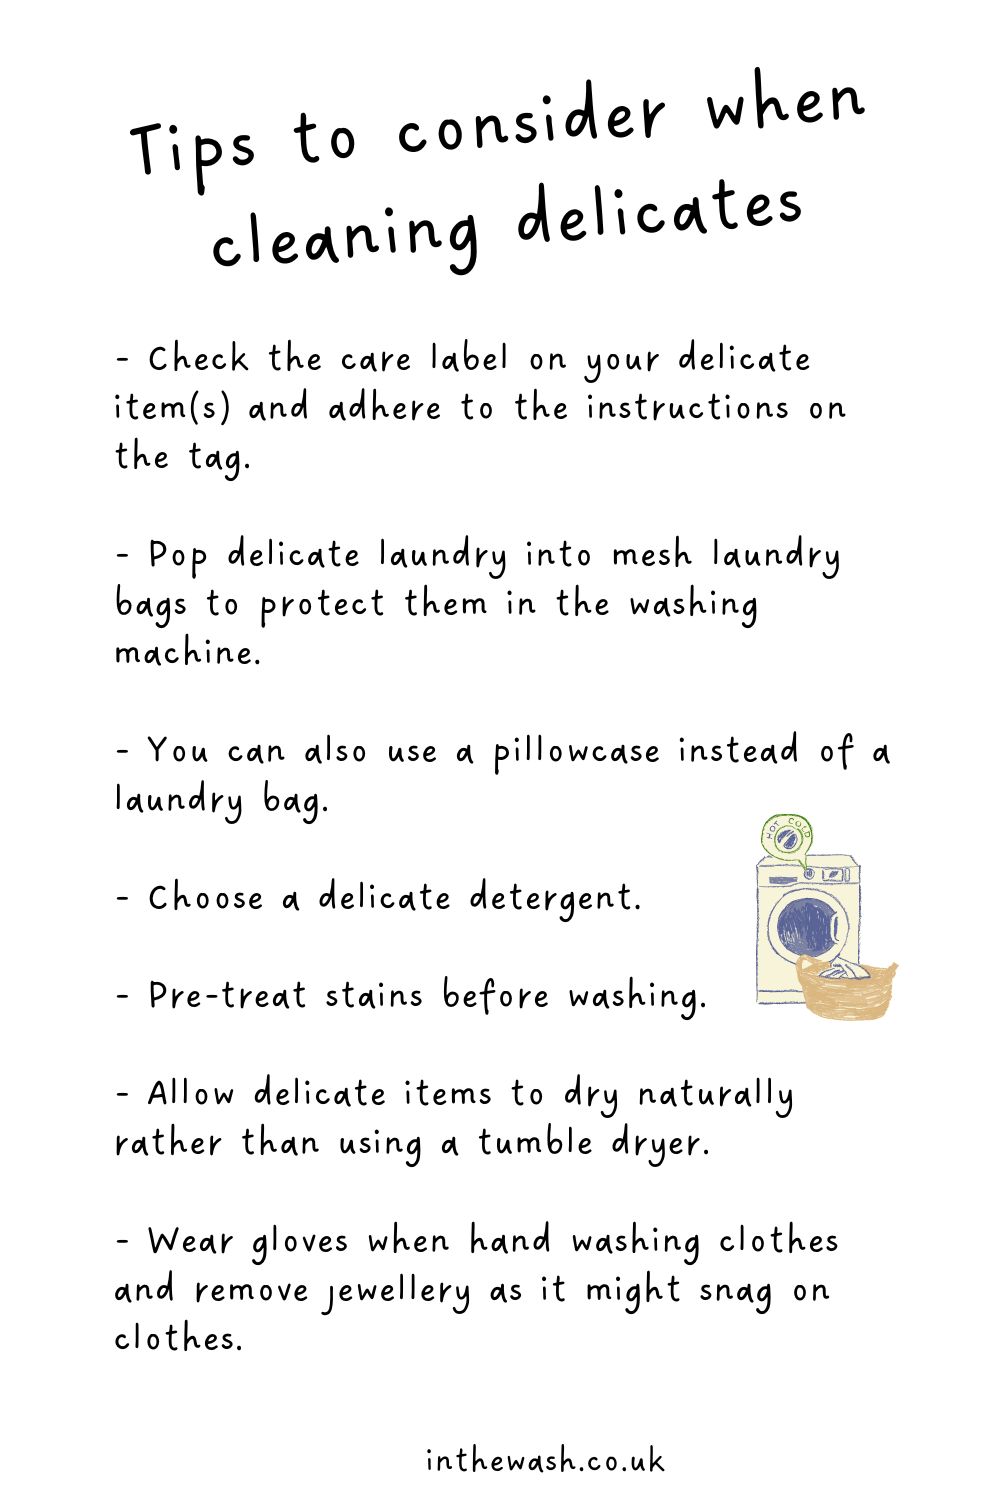 Tips to consider when cleaning delicates